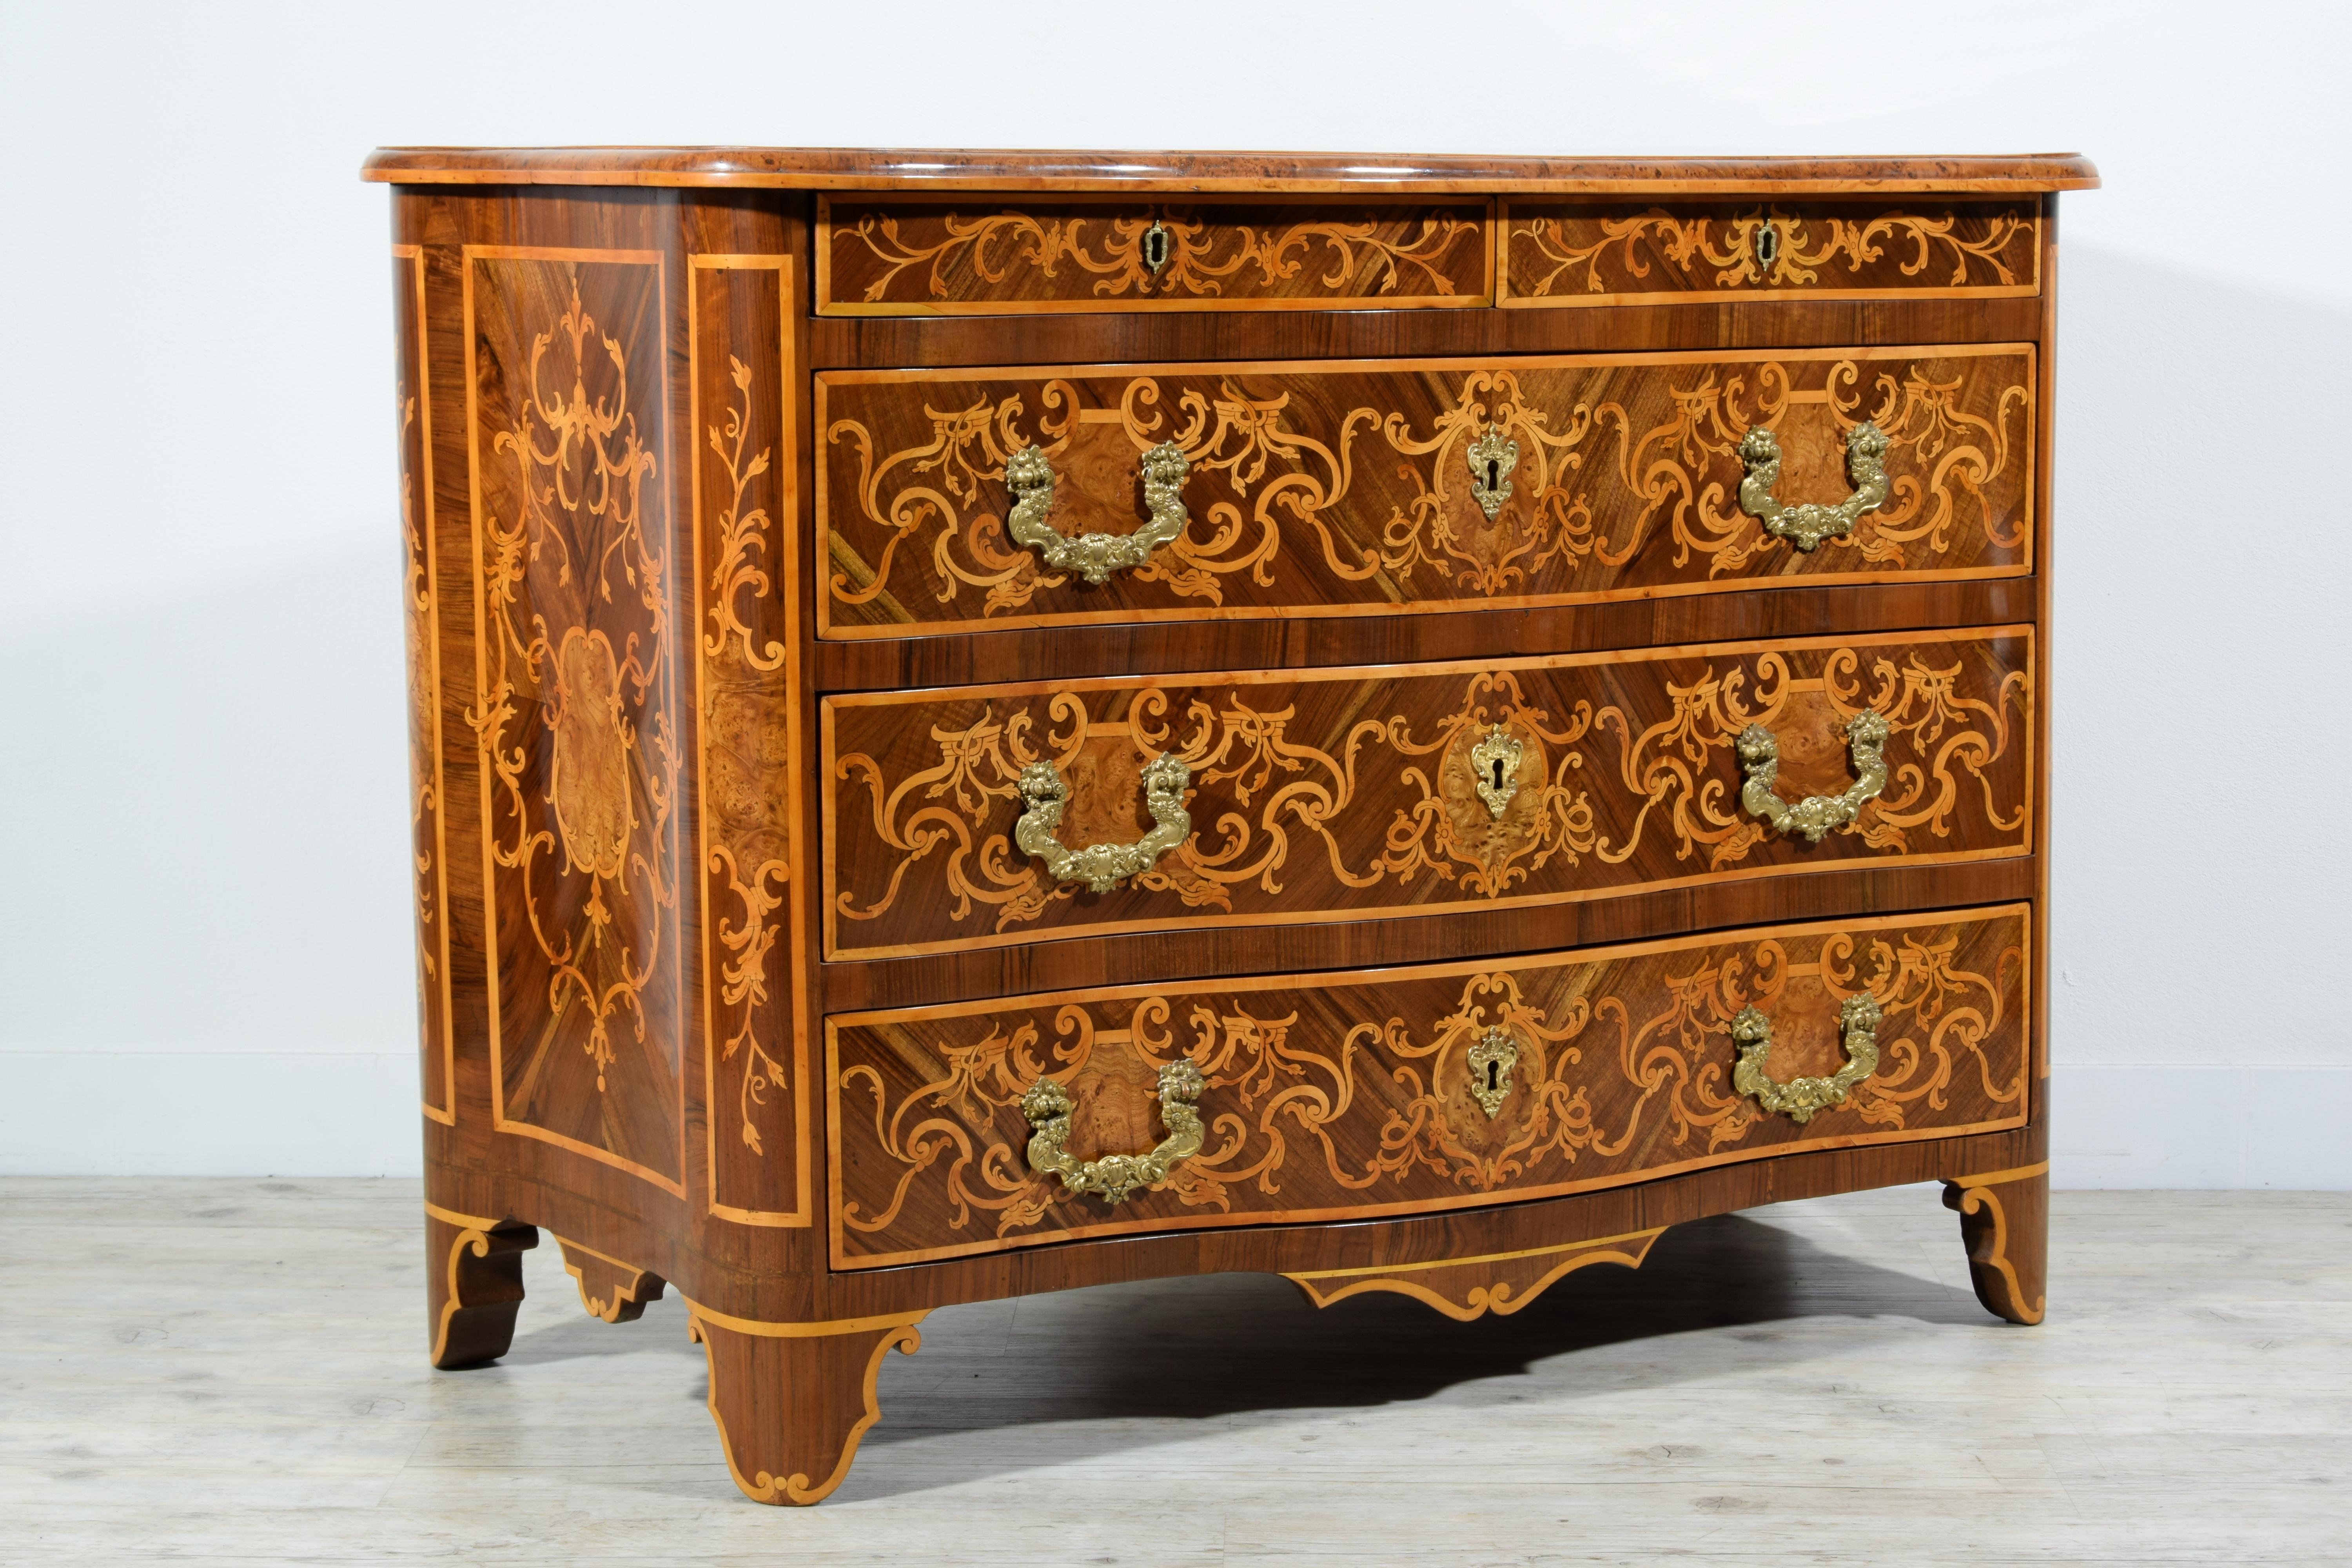 18th Century, Italian paved and inlaid wood chest of drawers
Excellent state of conservation

This commode represents a fine production of Italian Piedmontese cabinet making during the mid-18th century. The important chest of drawers is inlaid in